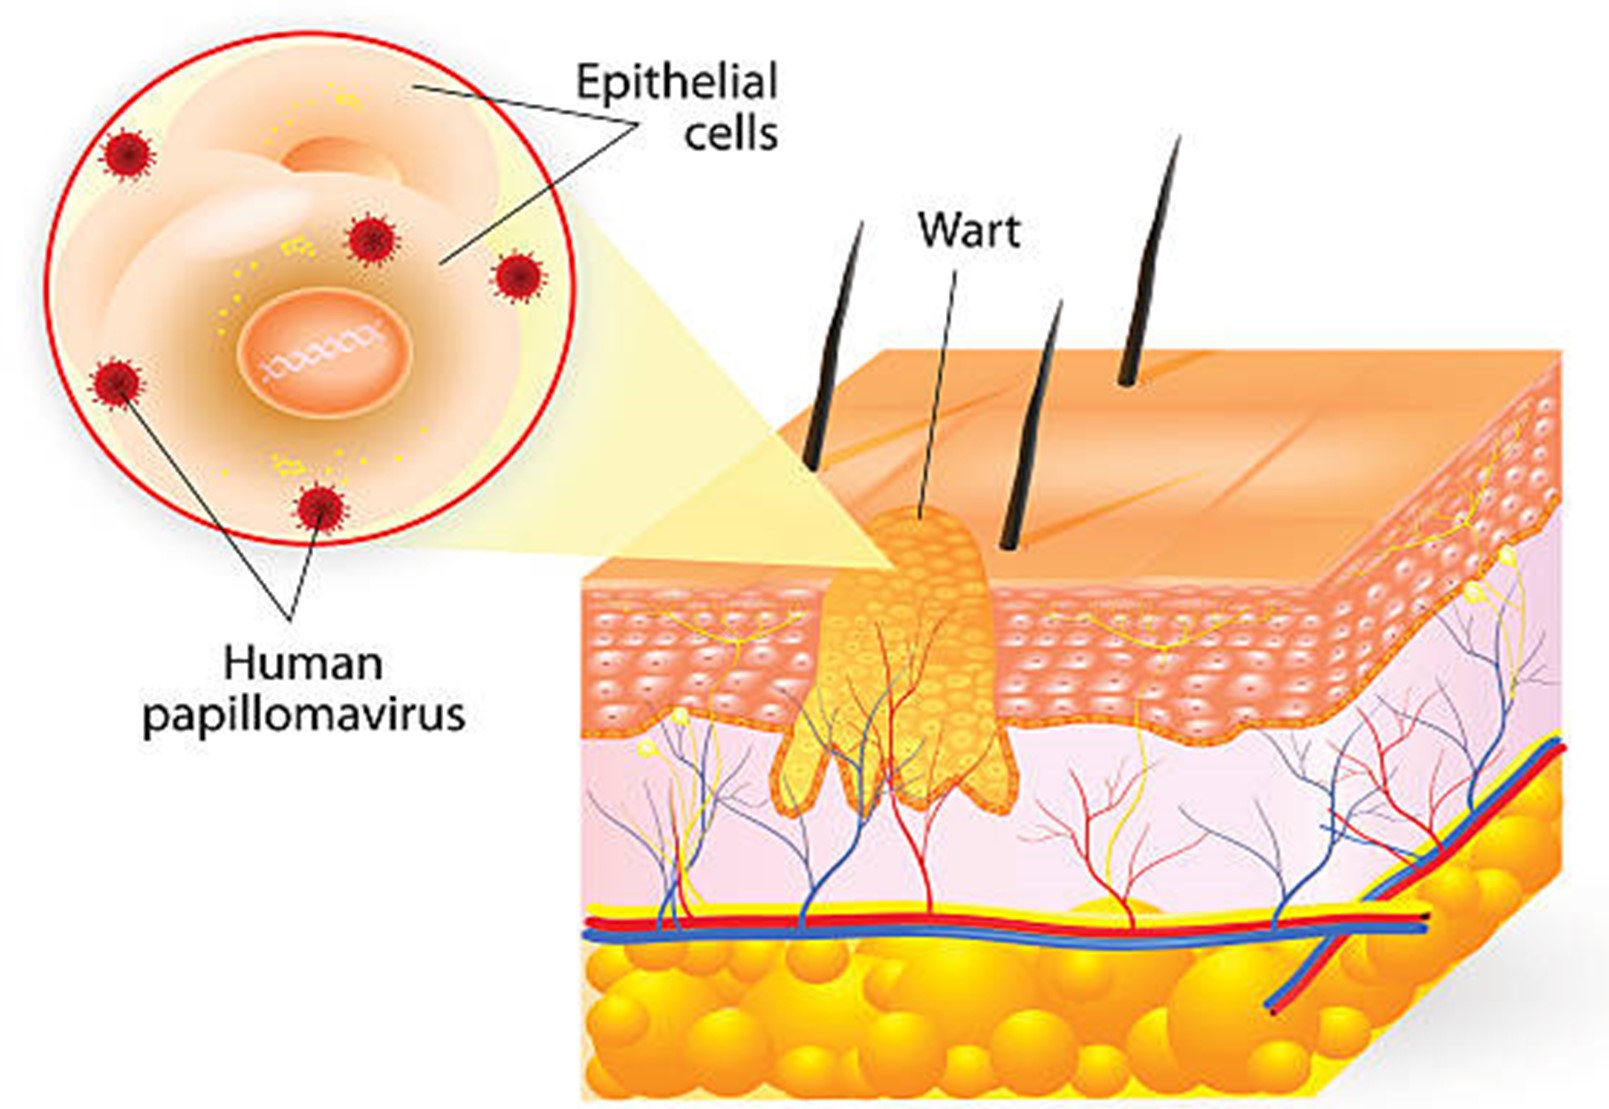 What Causes Warts?